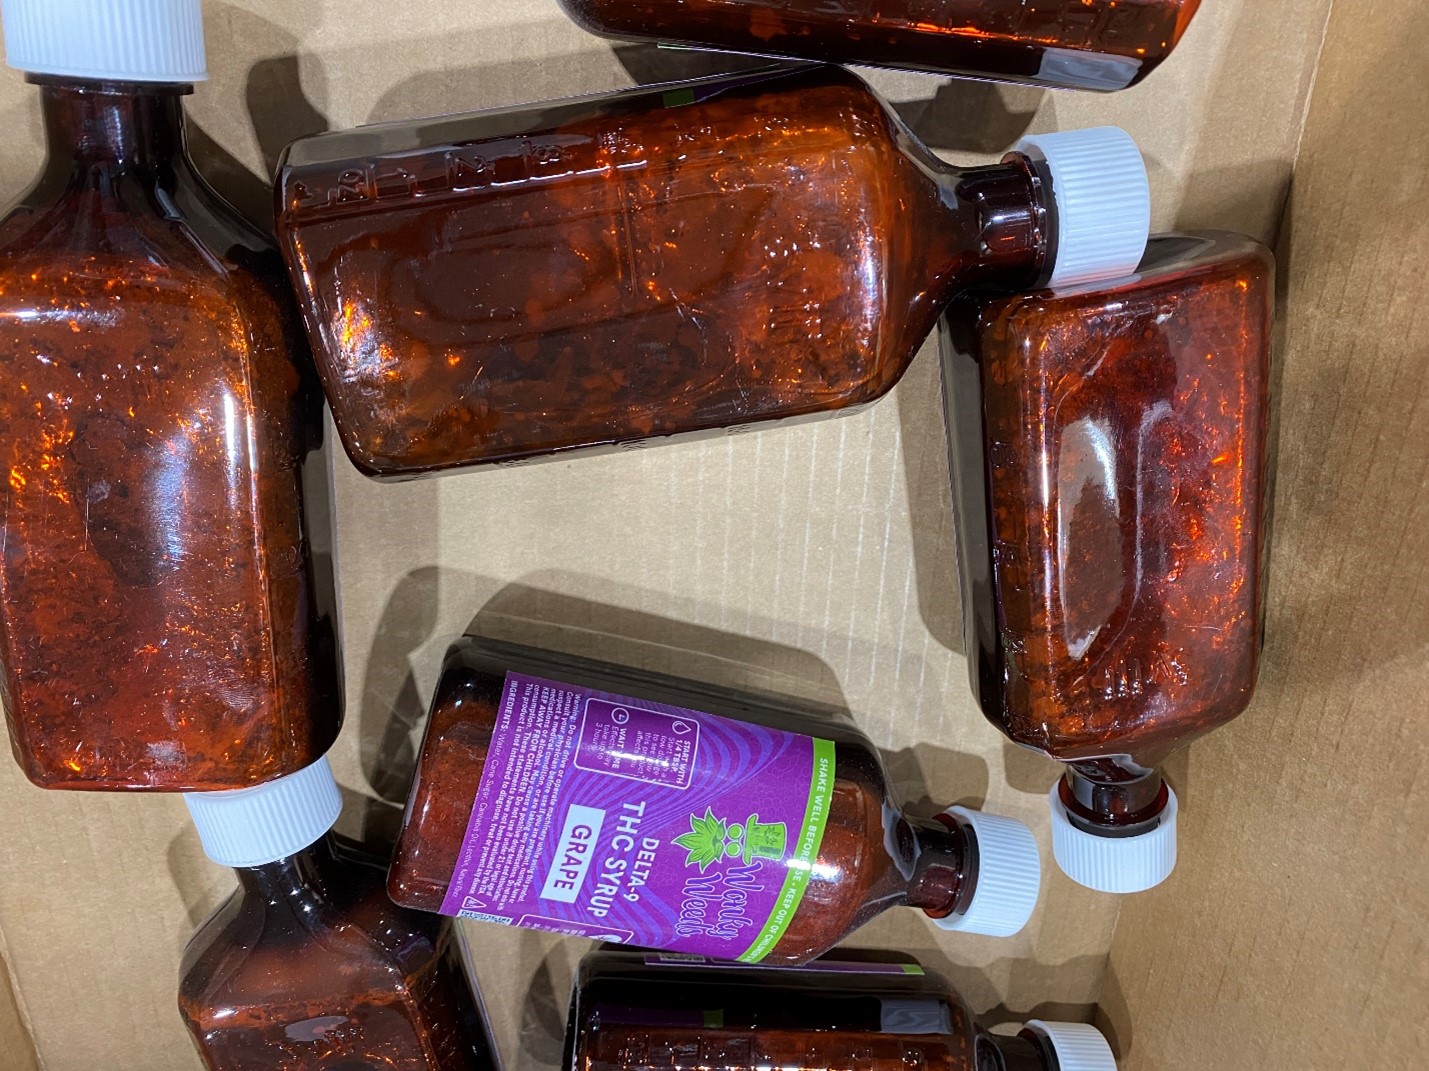 Several bottles of Wonky Weeds-brand grape-flavored delta 9 THC syrup with visible mold growth in the bottles.